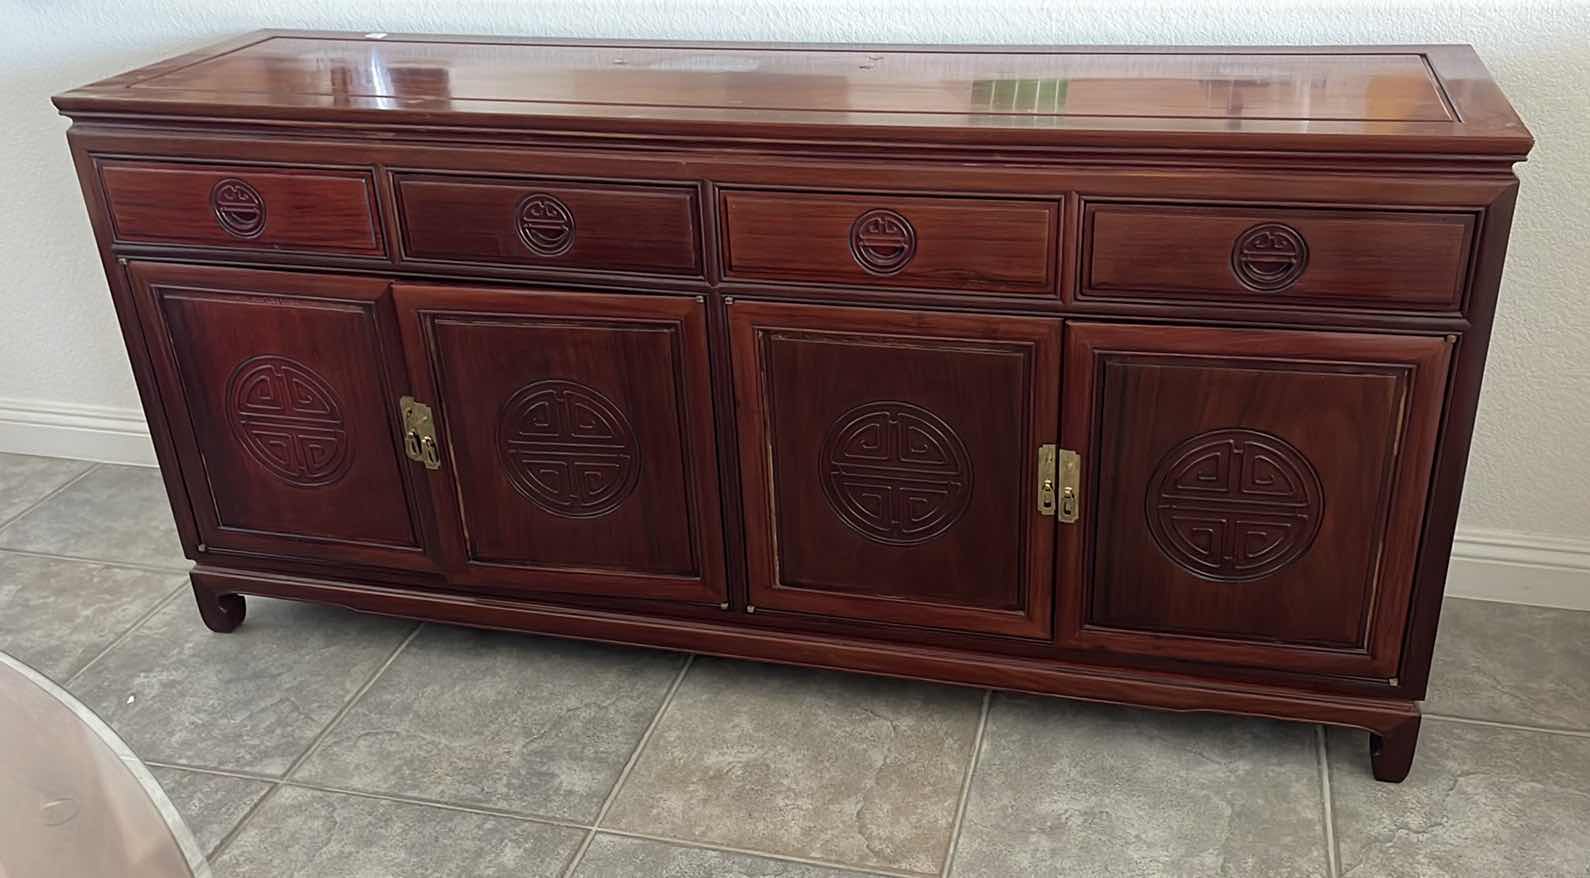 Photo 1 of ASIAN THEMED ROSEWOOD BUFFET SIDEBOARD CABINET WITH BRASS HARDWARE 72” X 19” X H34”